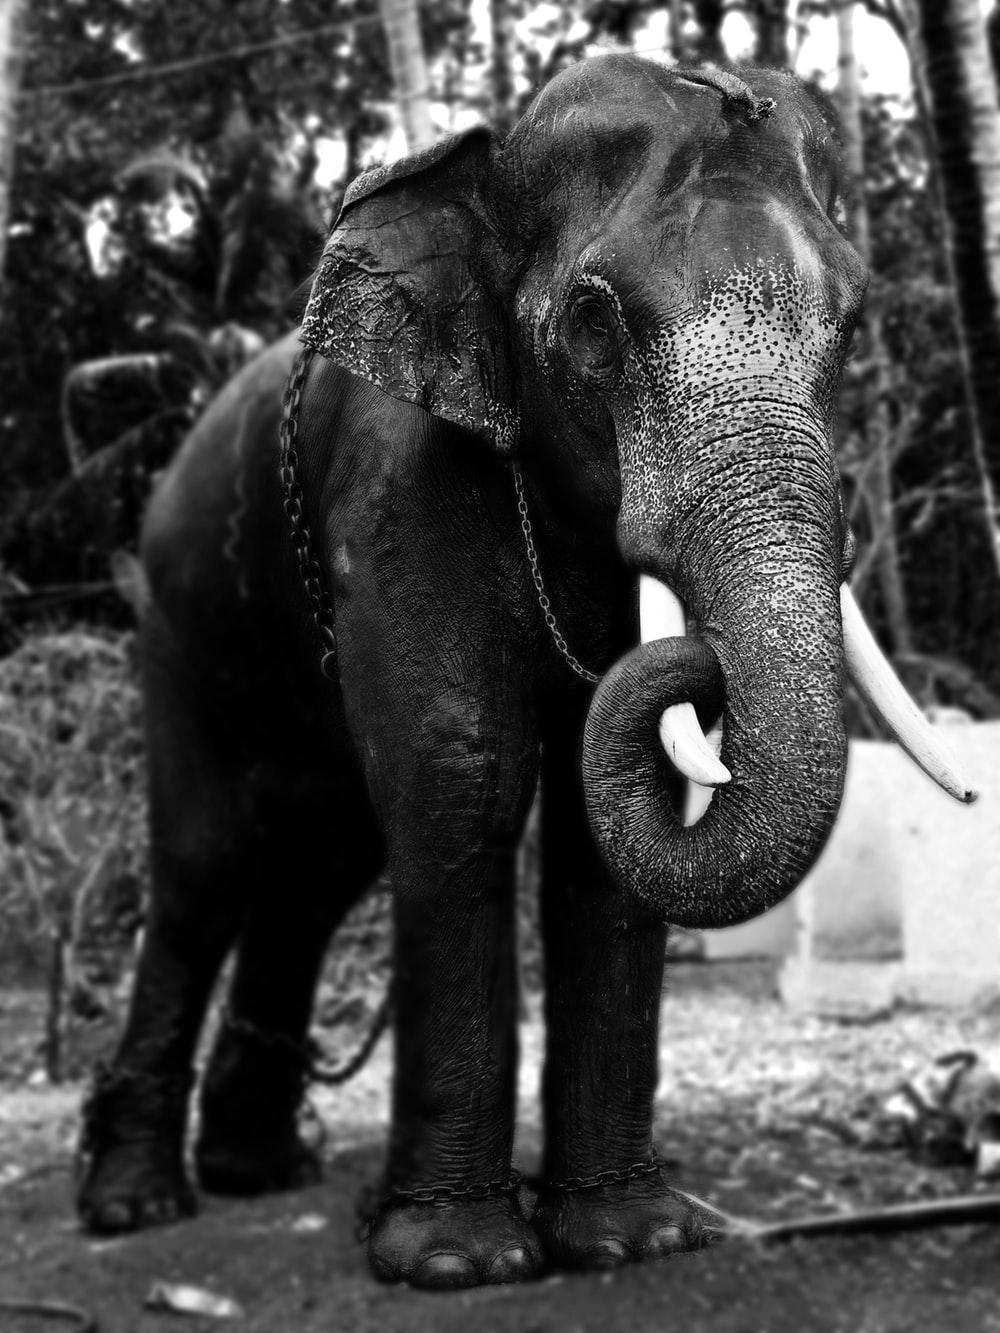 Indian Elephant Picture. Download Free Image